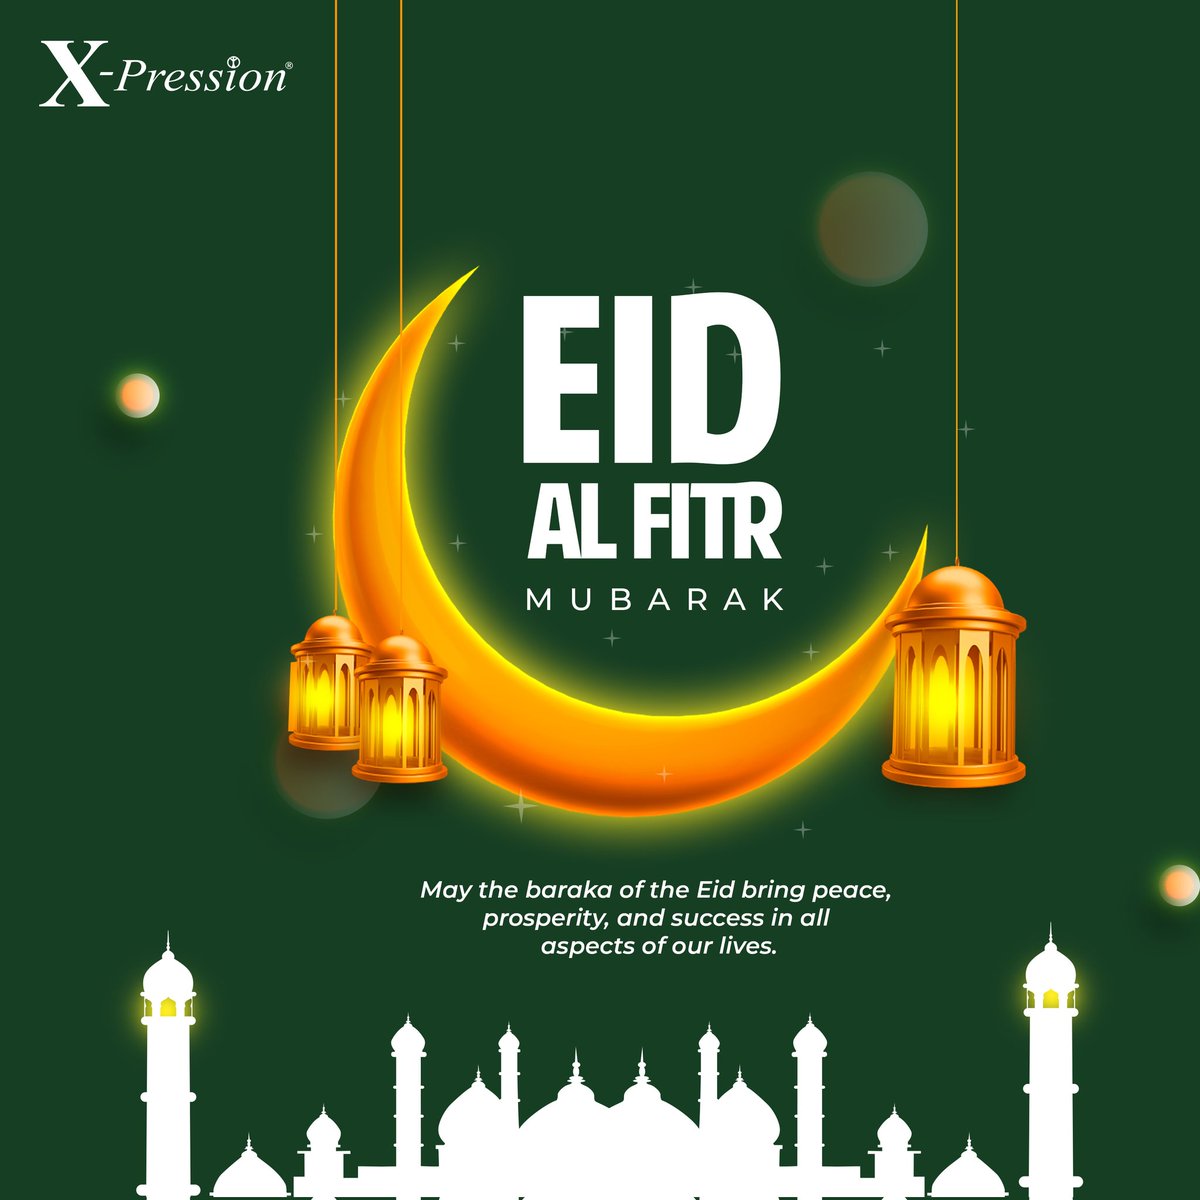 Eid Mubarak! May this joyous occasion bring you peace, prosperity, and blessings after the holy month of Ramadan. #xp4you #xpression #eidmubarak #eid #eidalfitr #ramadan #ramadanmubarak #ramadankareem